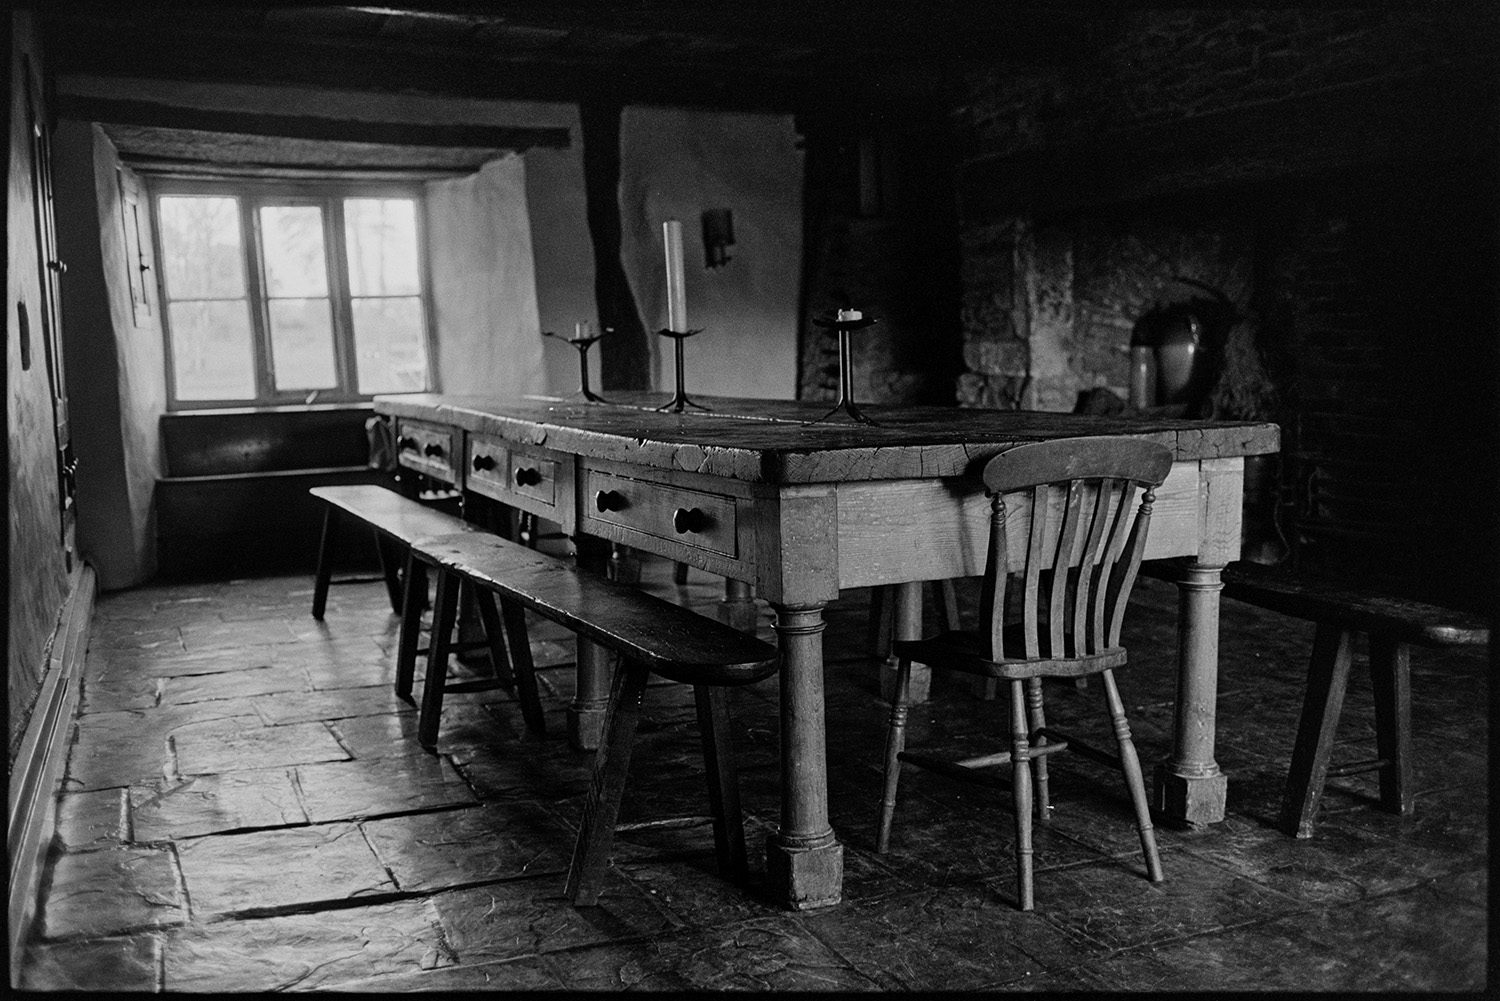 Farmhouse used as creative writing centre. 
[A large wooden dining table with drawers and benches at the Arvon Centre at Totleigh Barton, Sheepwash.  A chair is also at the table which has candlesticks placed on it. The floor is made from flagstones. The farmhouse was used as a creative writing centre.]